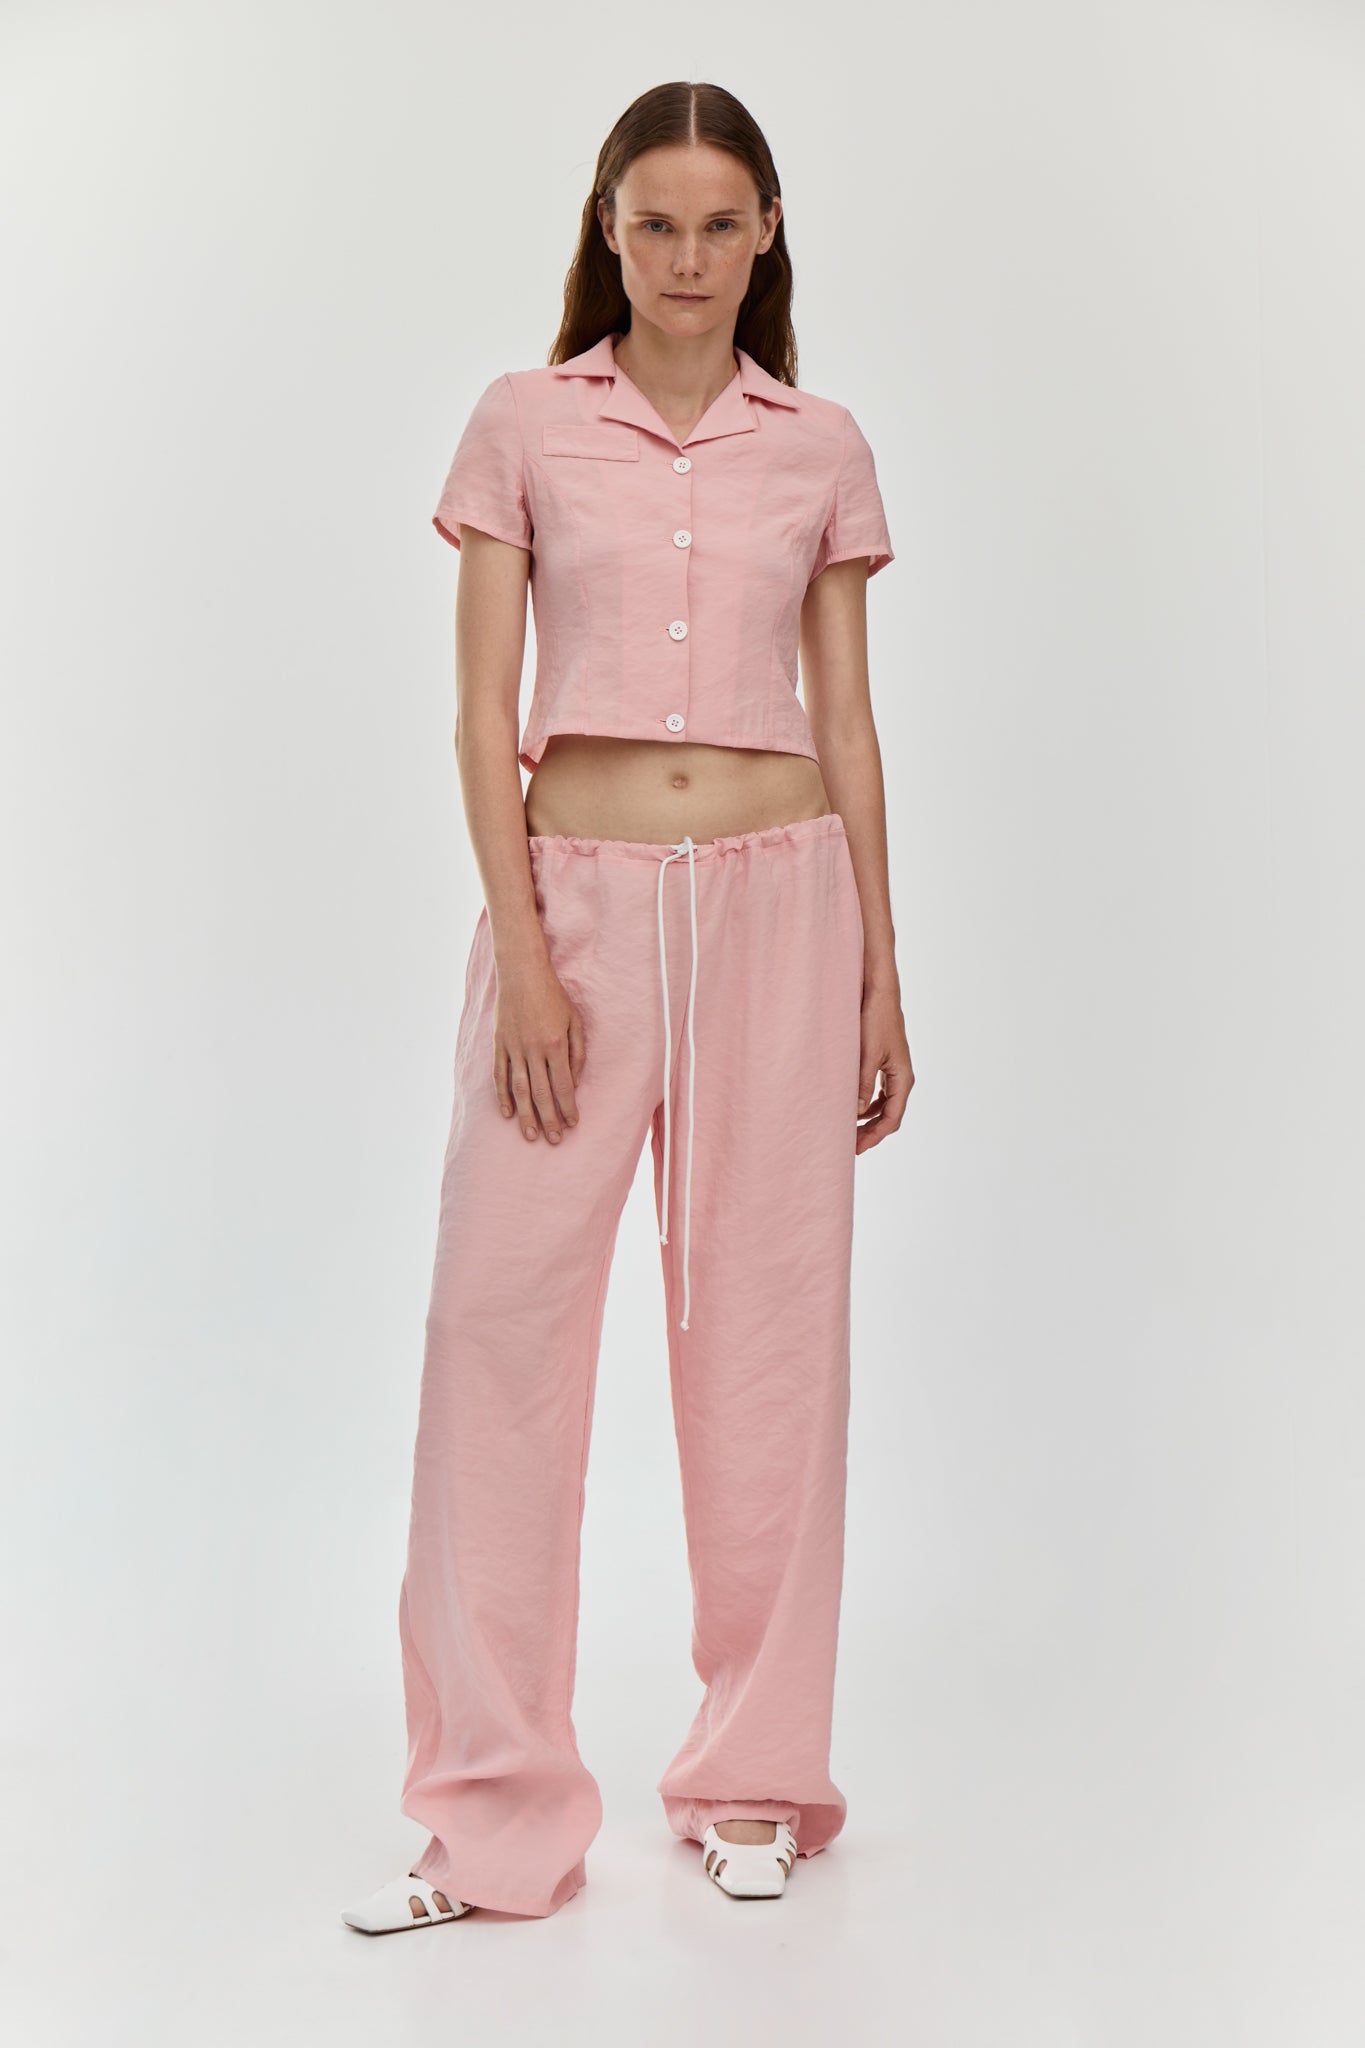 Viscose pink blend suit with trousers featuring a drawstring fastening waist and crop jacket from FORMA brand